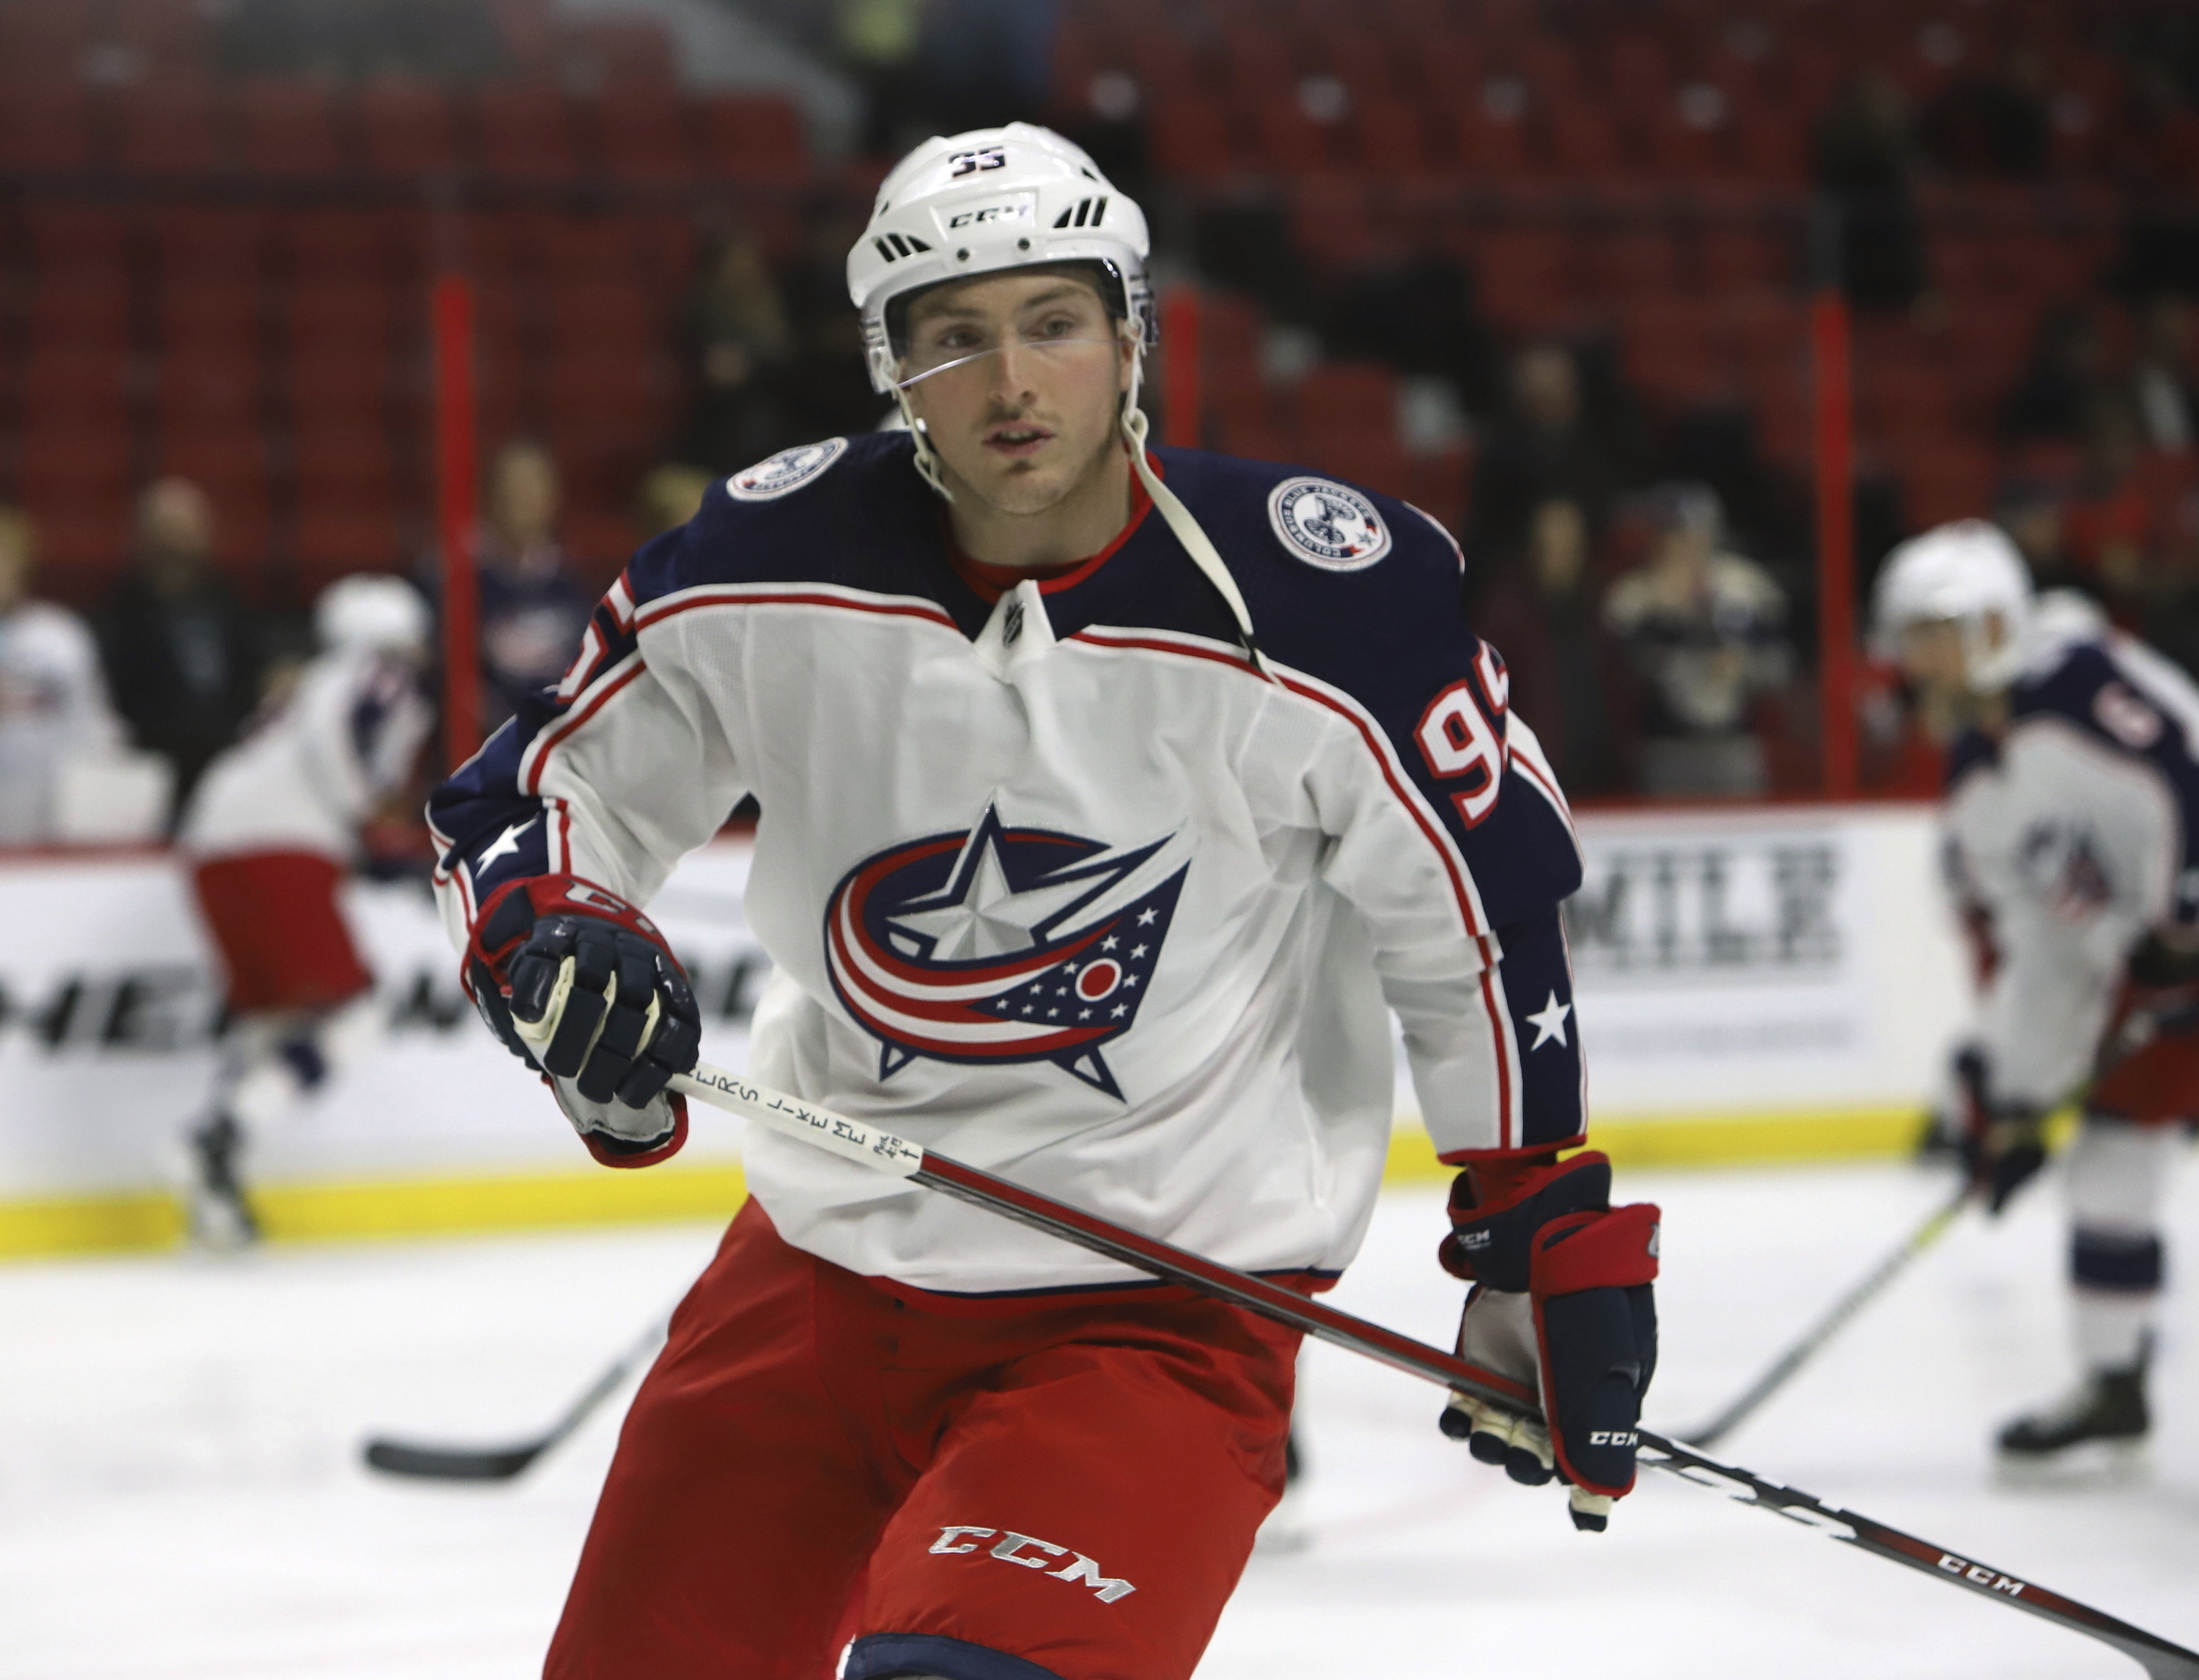 Flurry of moves shows Blue Jackets want to win now